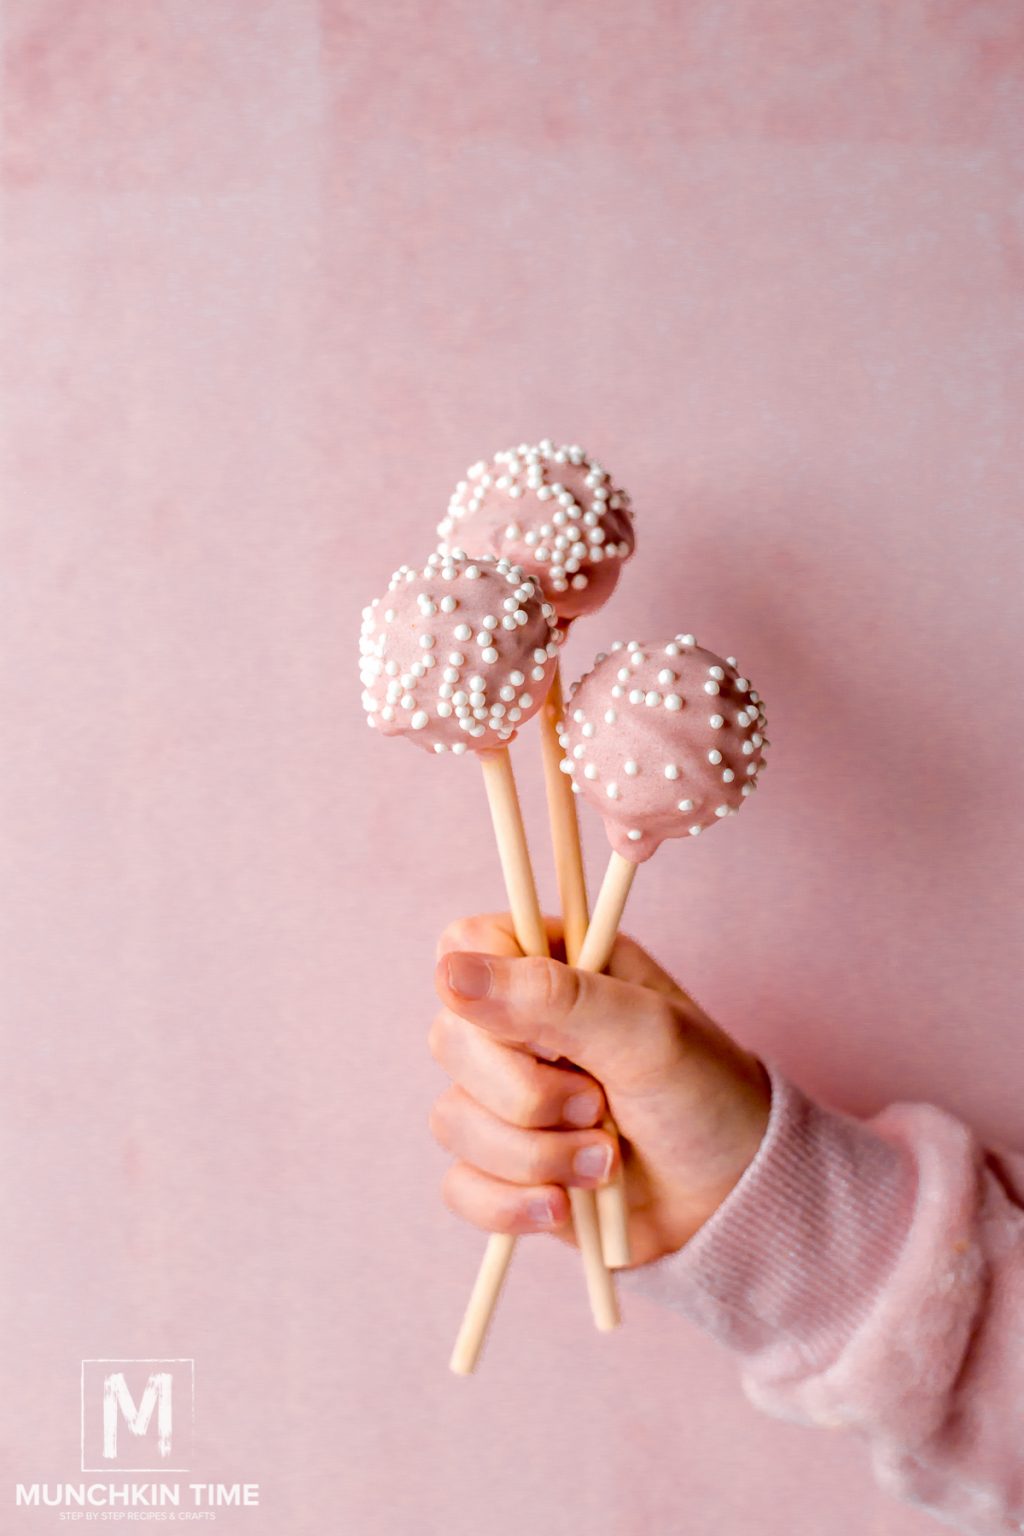 How To Make Cake Pops Form Scratch